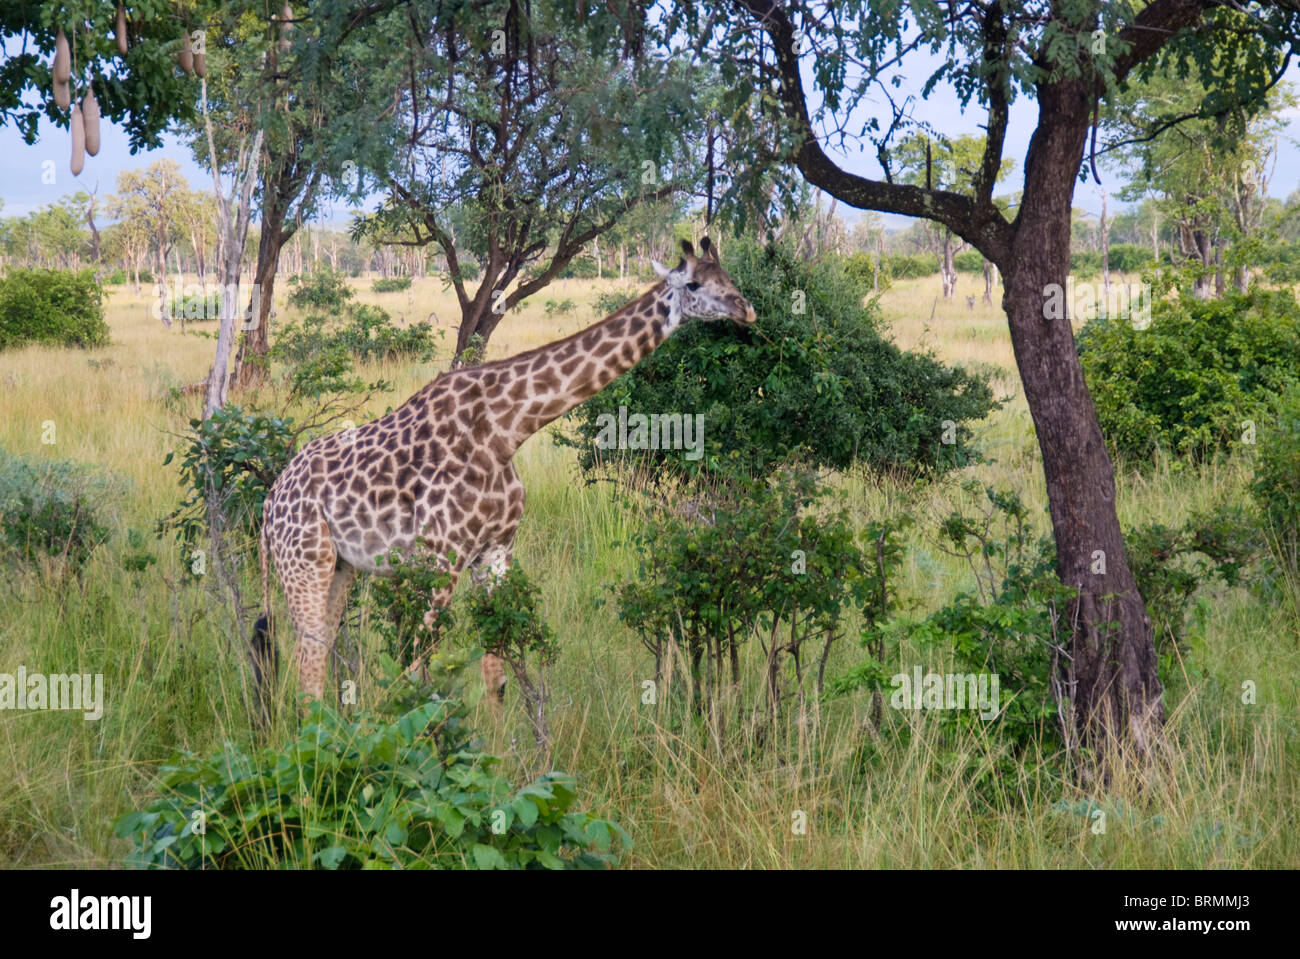 Giraffe standing amongst trees with its neck lowered and eating leaves Stock Photo